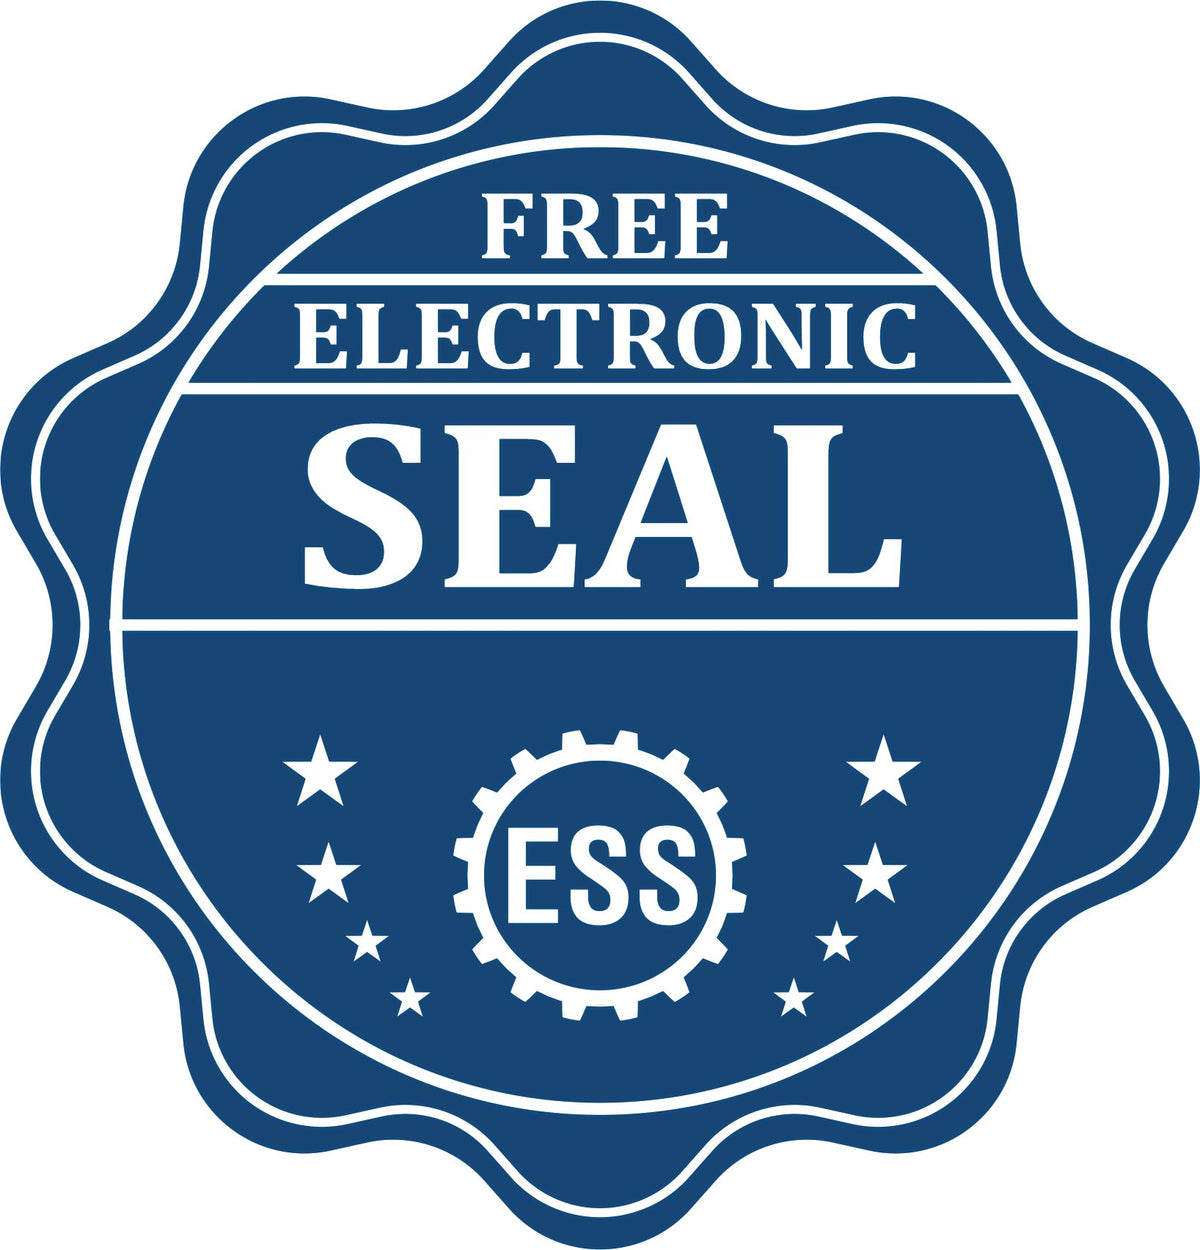 A badge showing a free electronic seal for the Handheld Maryland Professional Geologist Embosser with stars and the ESS gear on the emblem.